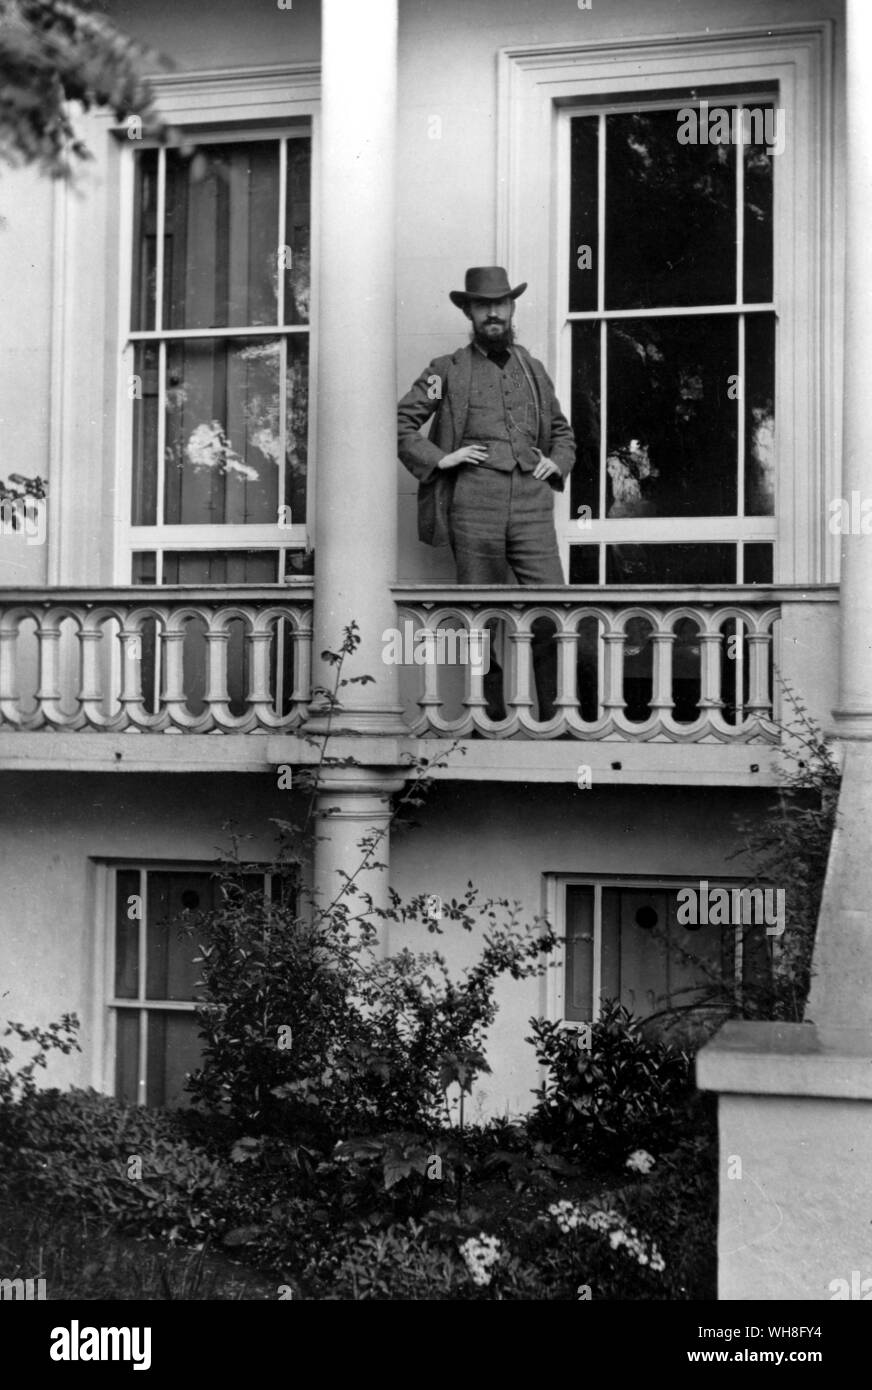 George Bernard Shaw at Hammersmith Terrace 1891. Shaw (1856-1950) was an Irish playwright and winner of the Nobel Prize for Literature in 1925. The Genius of Shaw page 143. Stock Photo